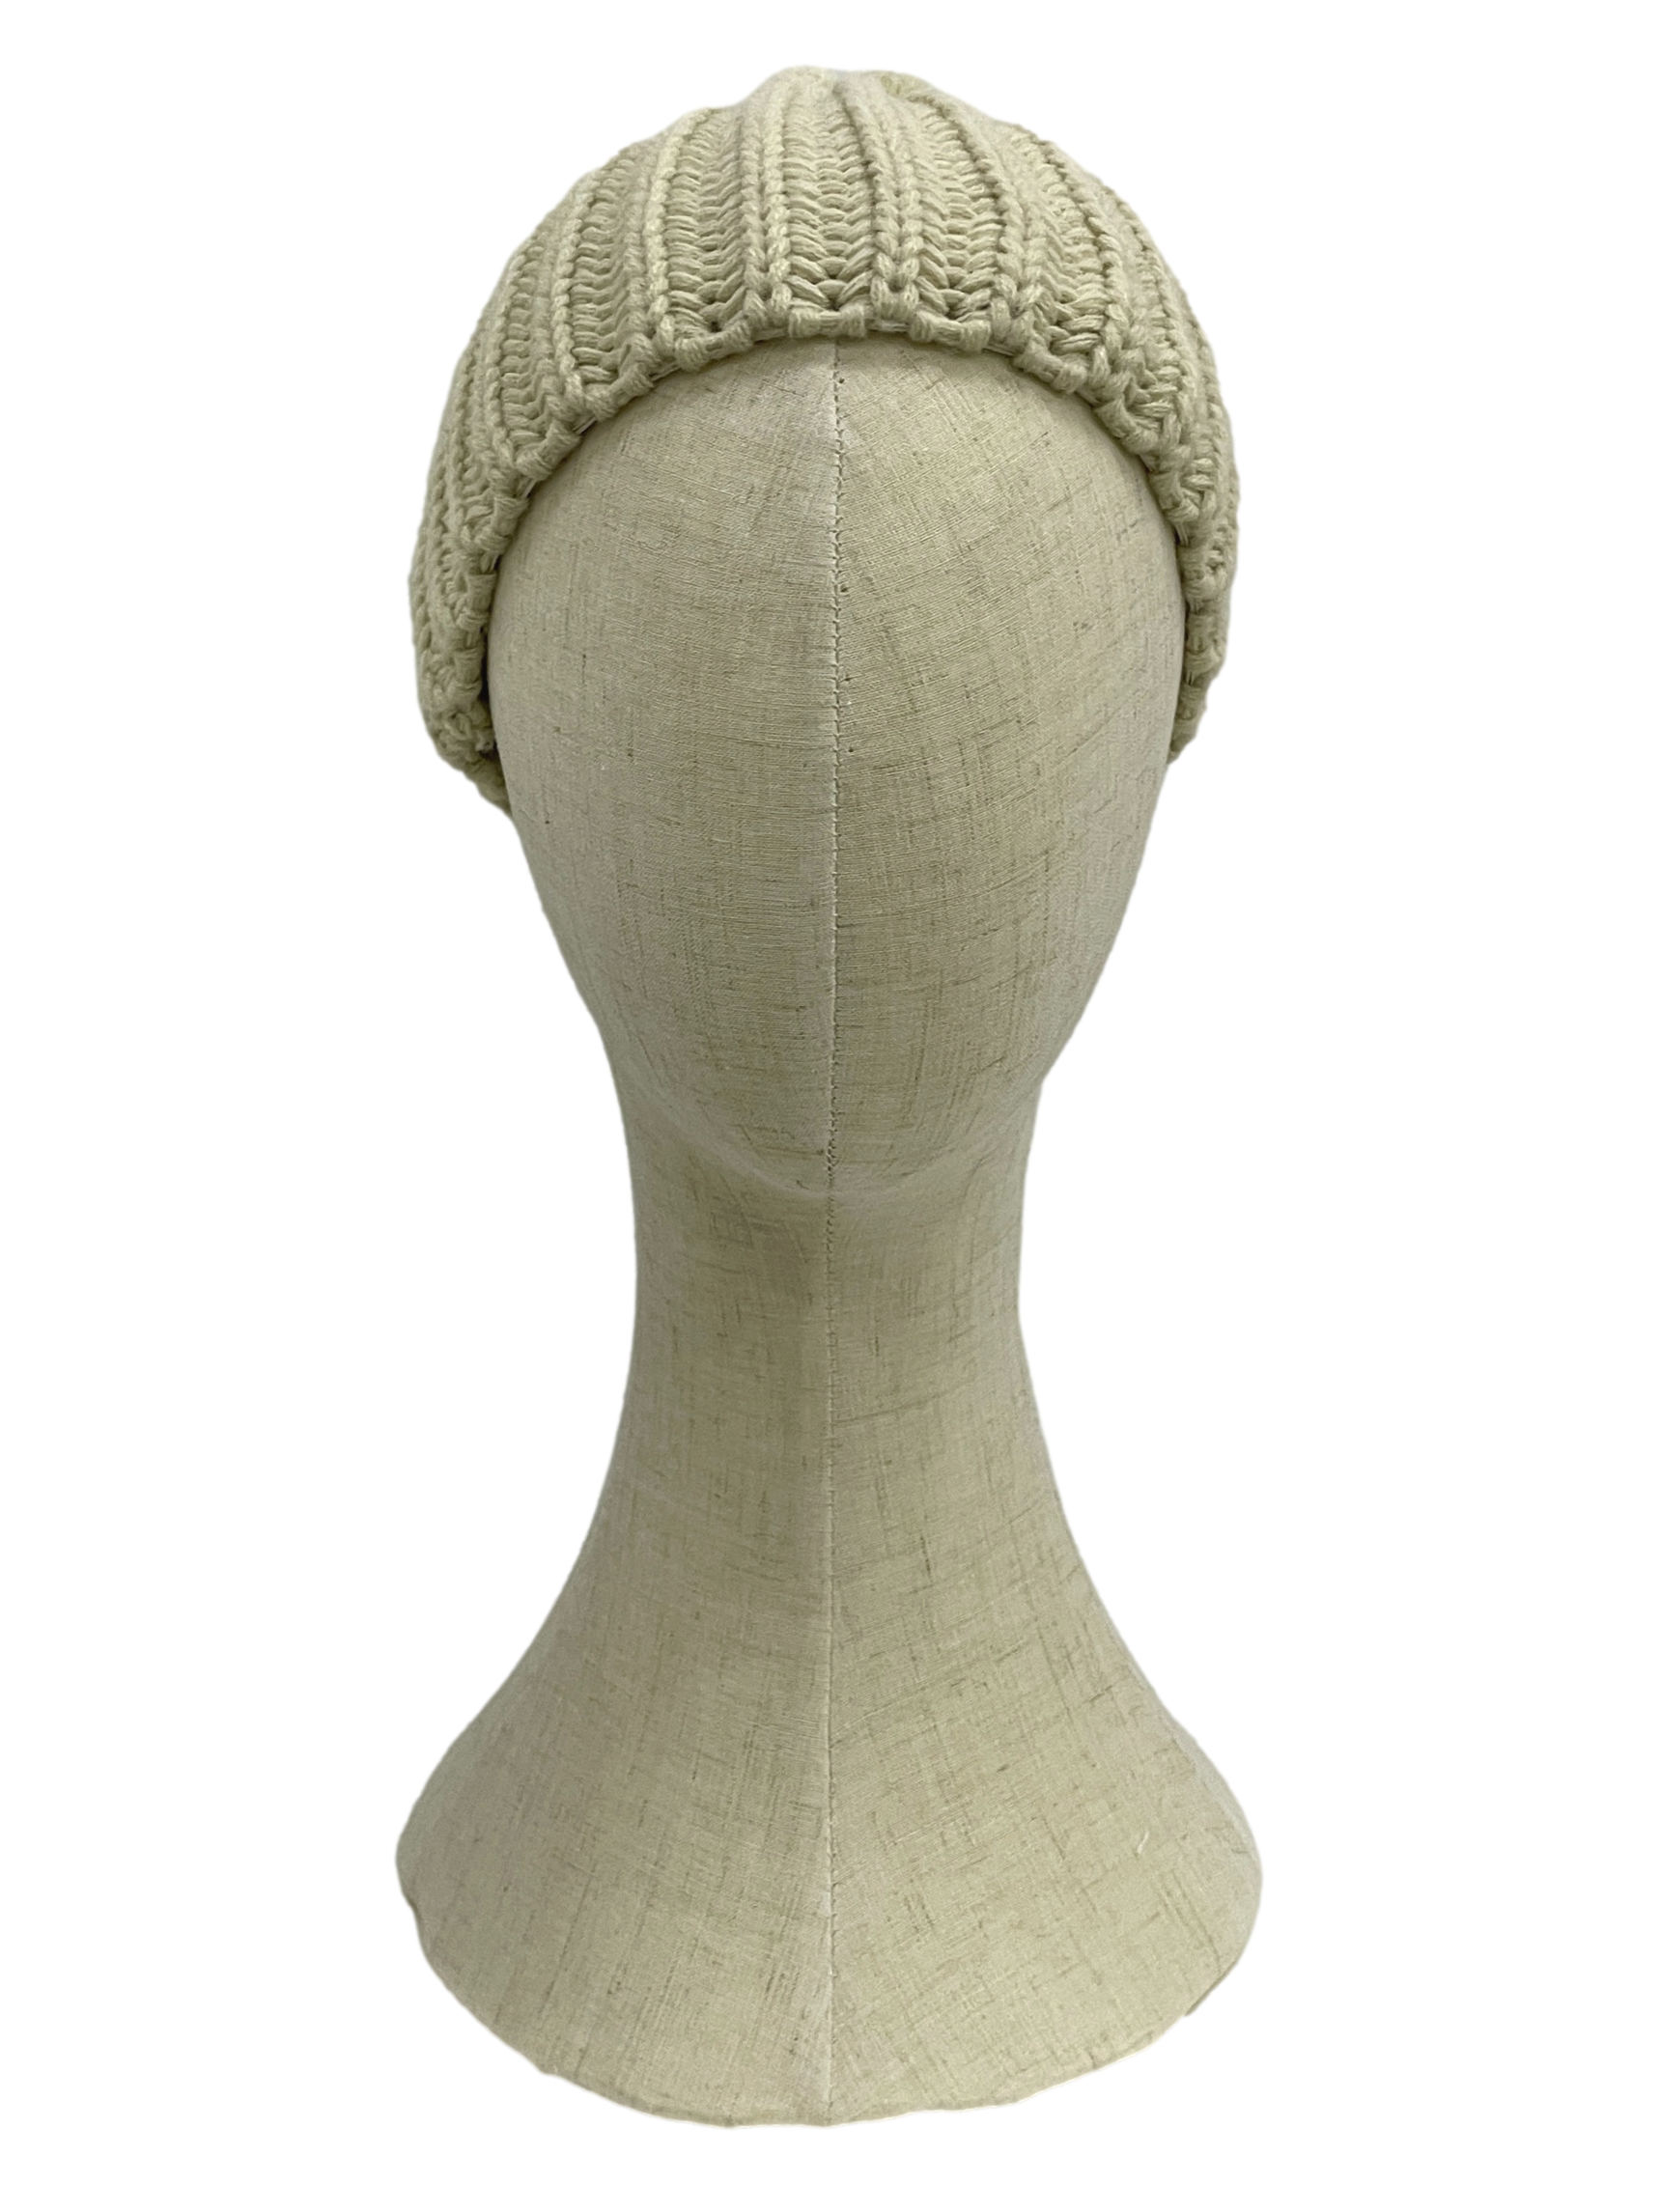 Ivory Knitted Snow Cap